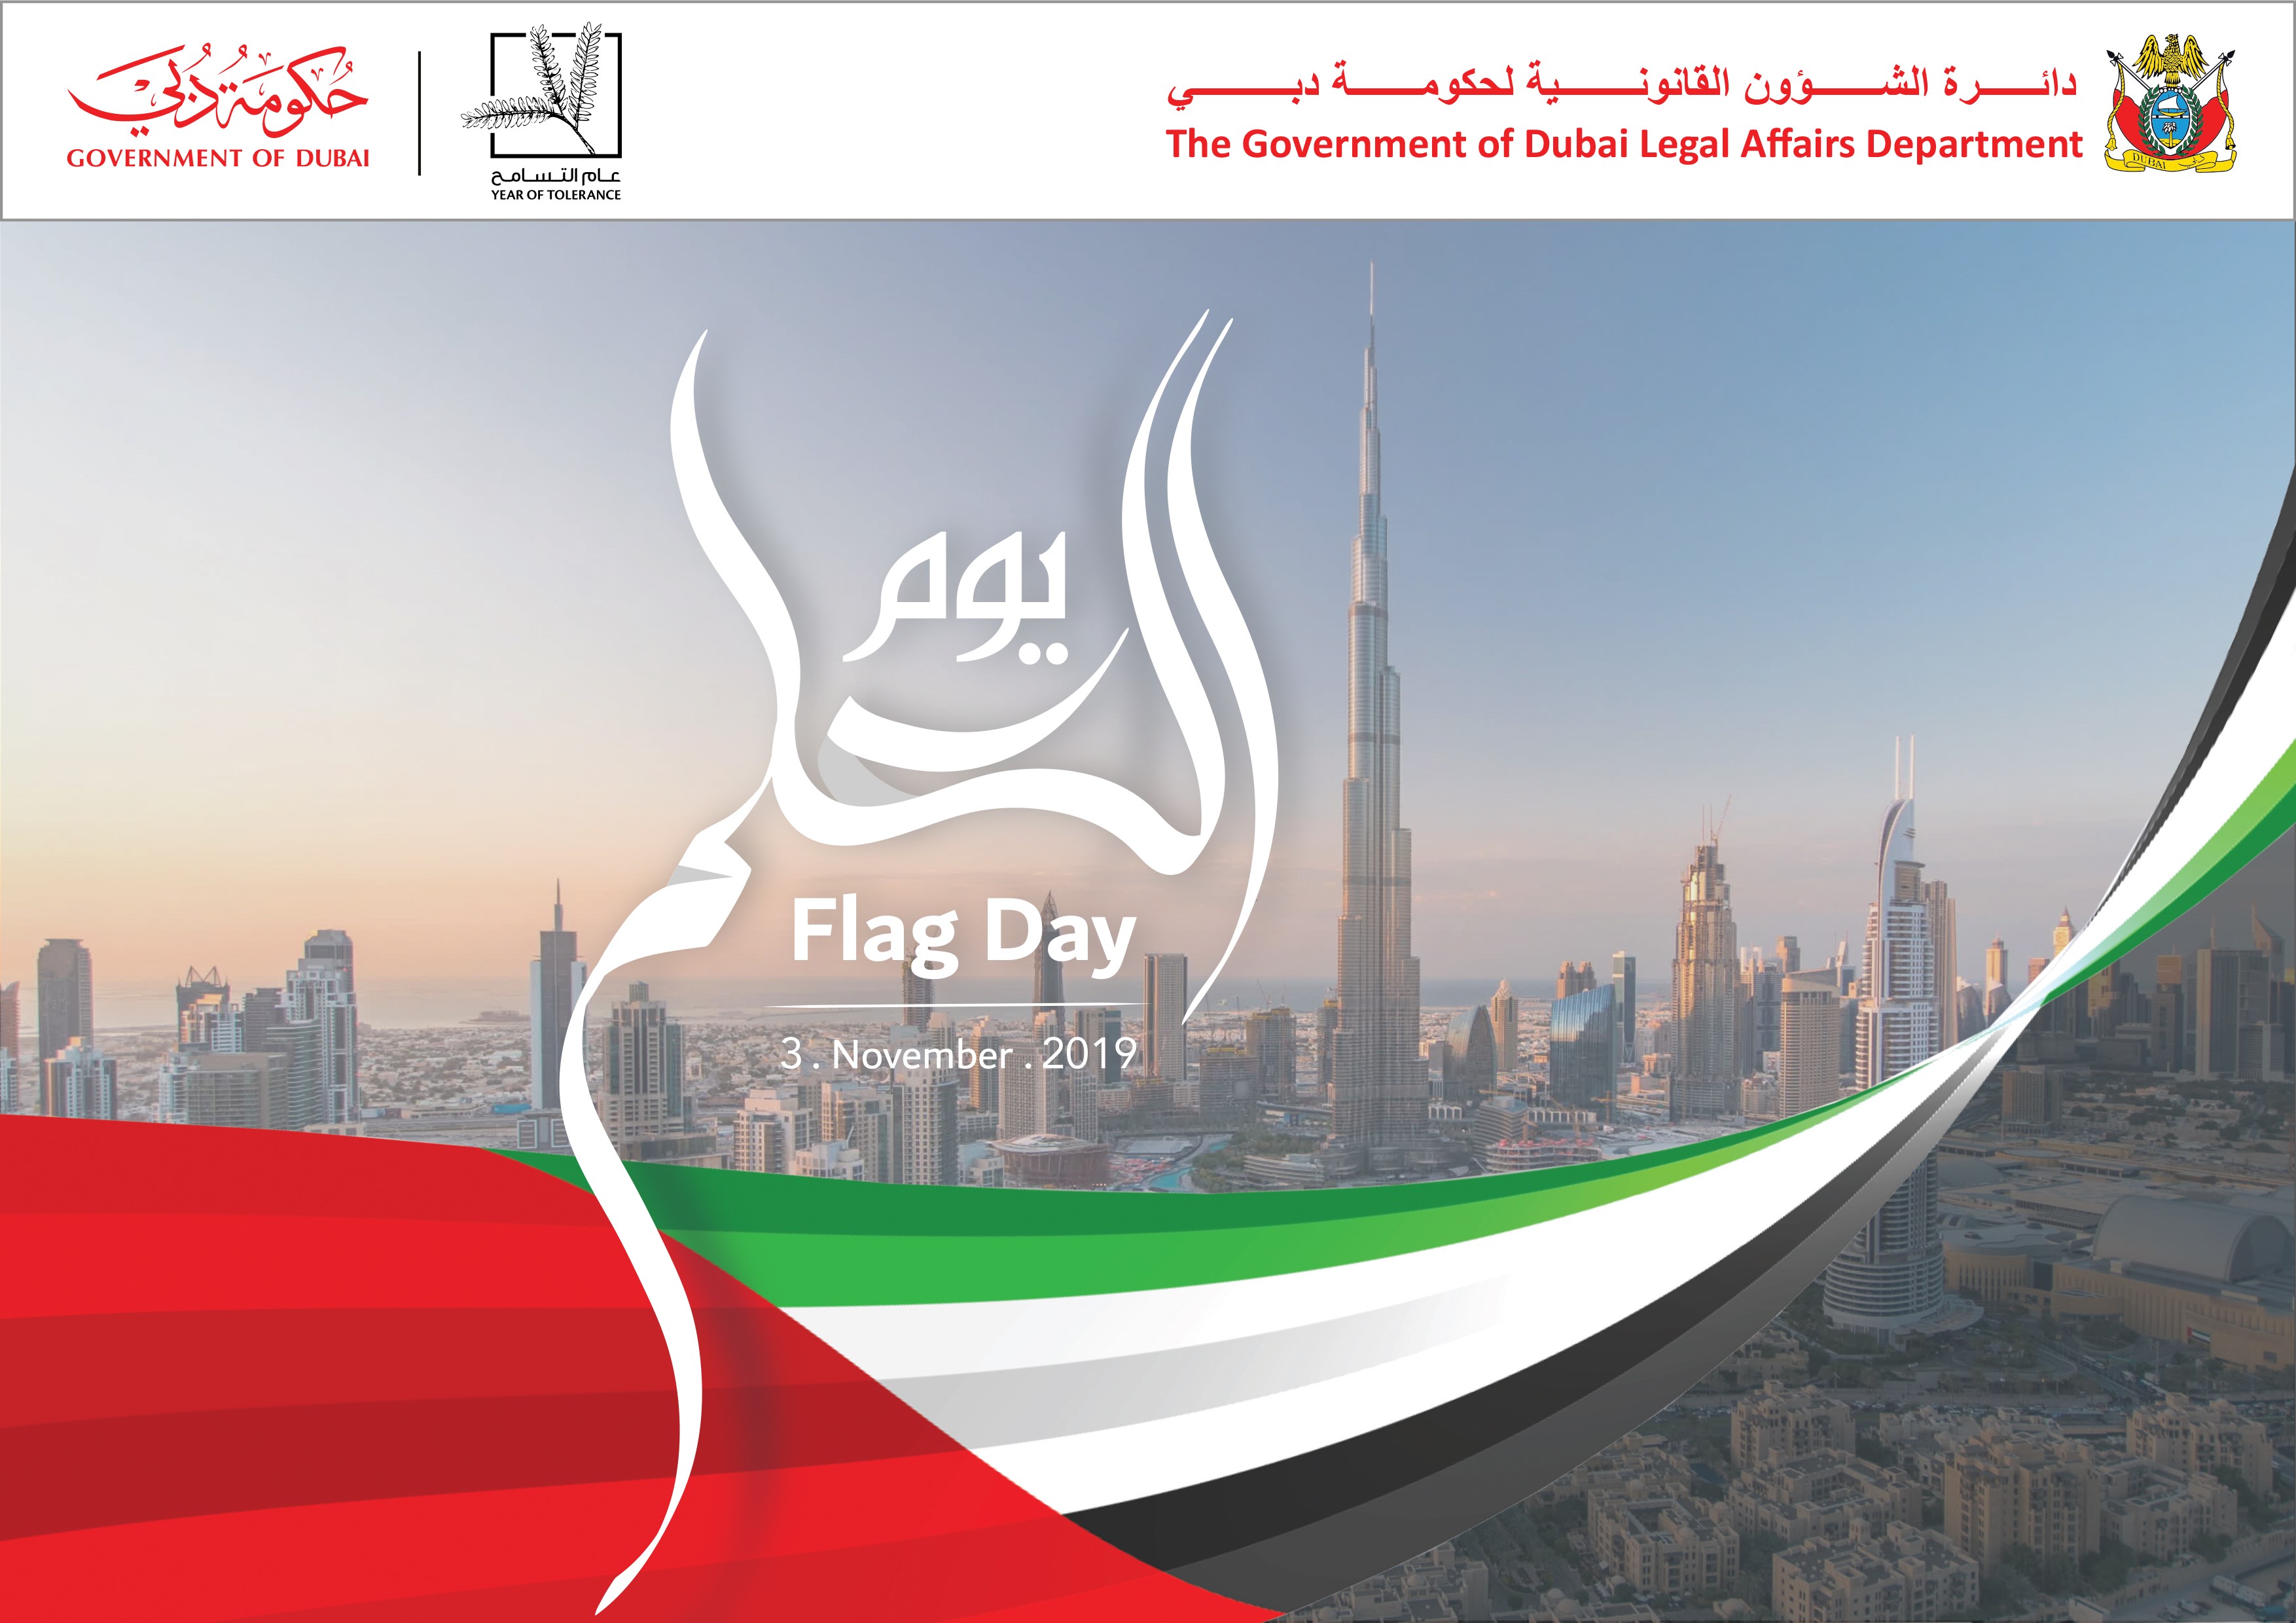 Words of His Excellency Dr. Lowai Mohamed Belhoul, Director General of the Government of Dubai Legal Affairs Department on the Occasion of Flag Day